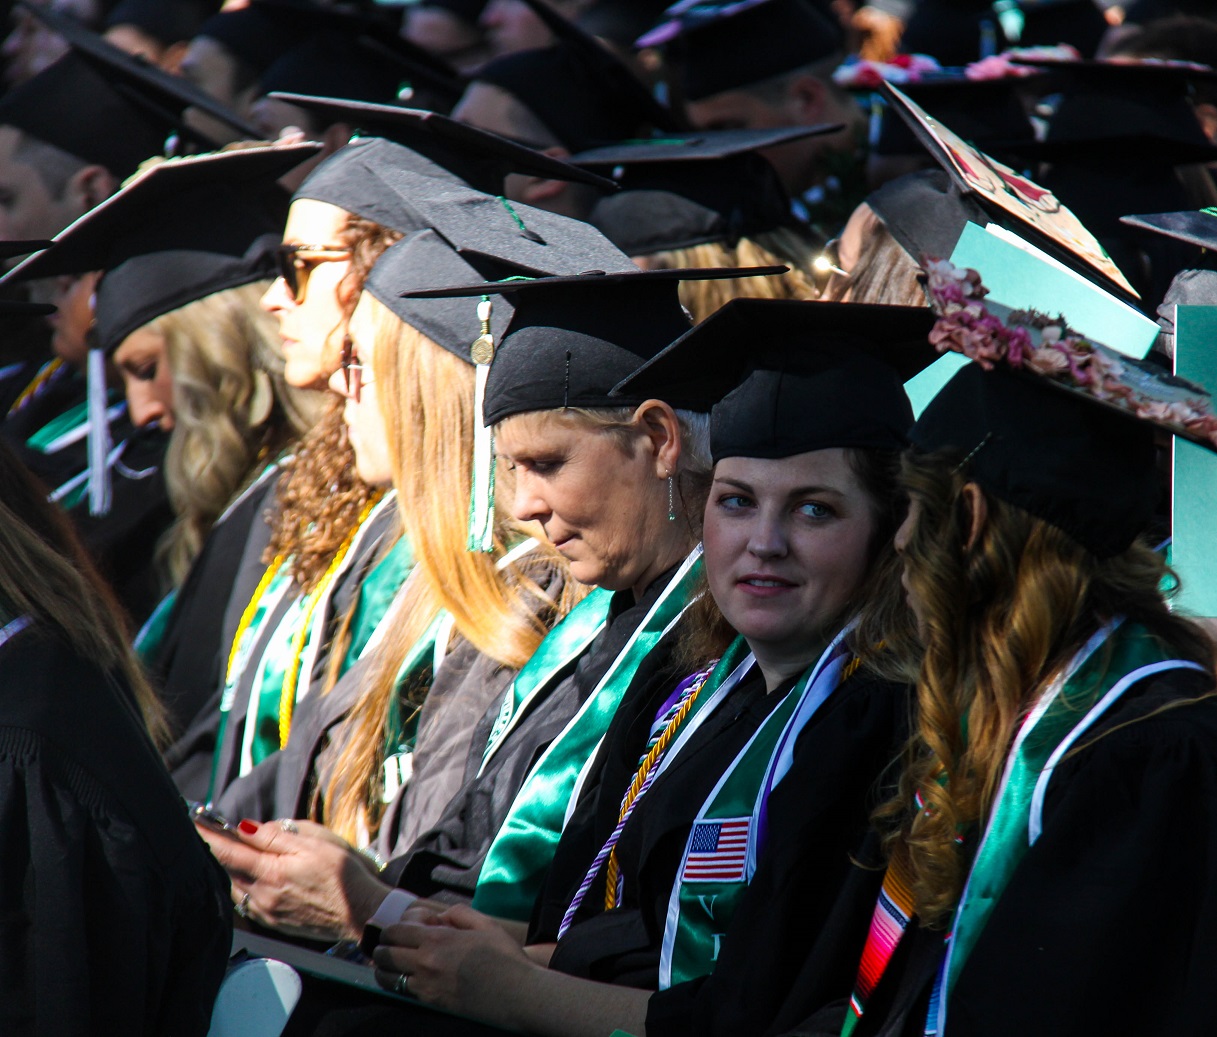 More than 700 students graduated in the Baccalaureate ceremony